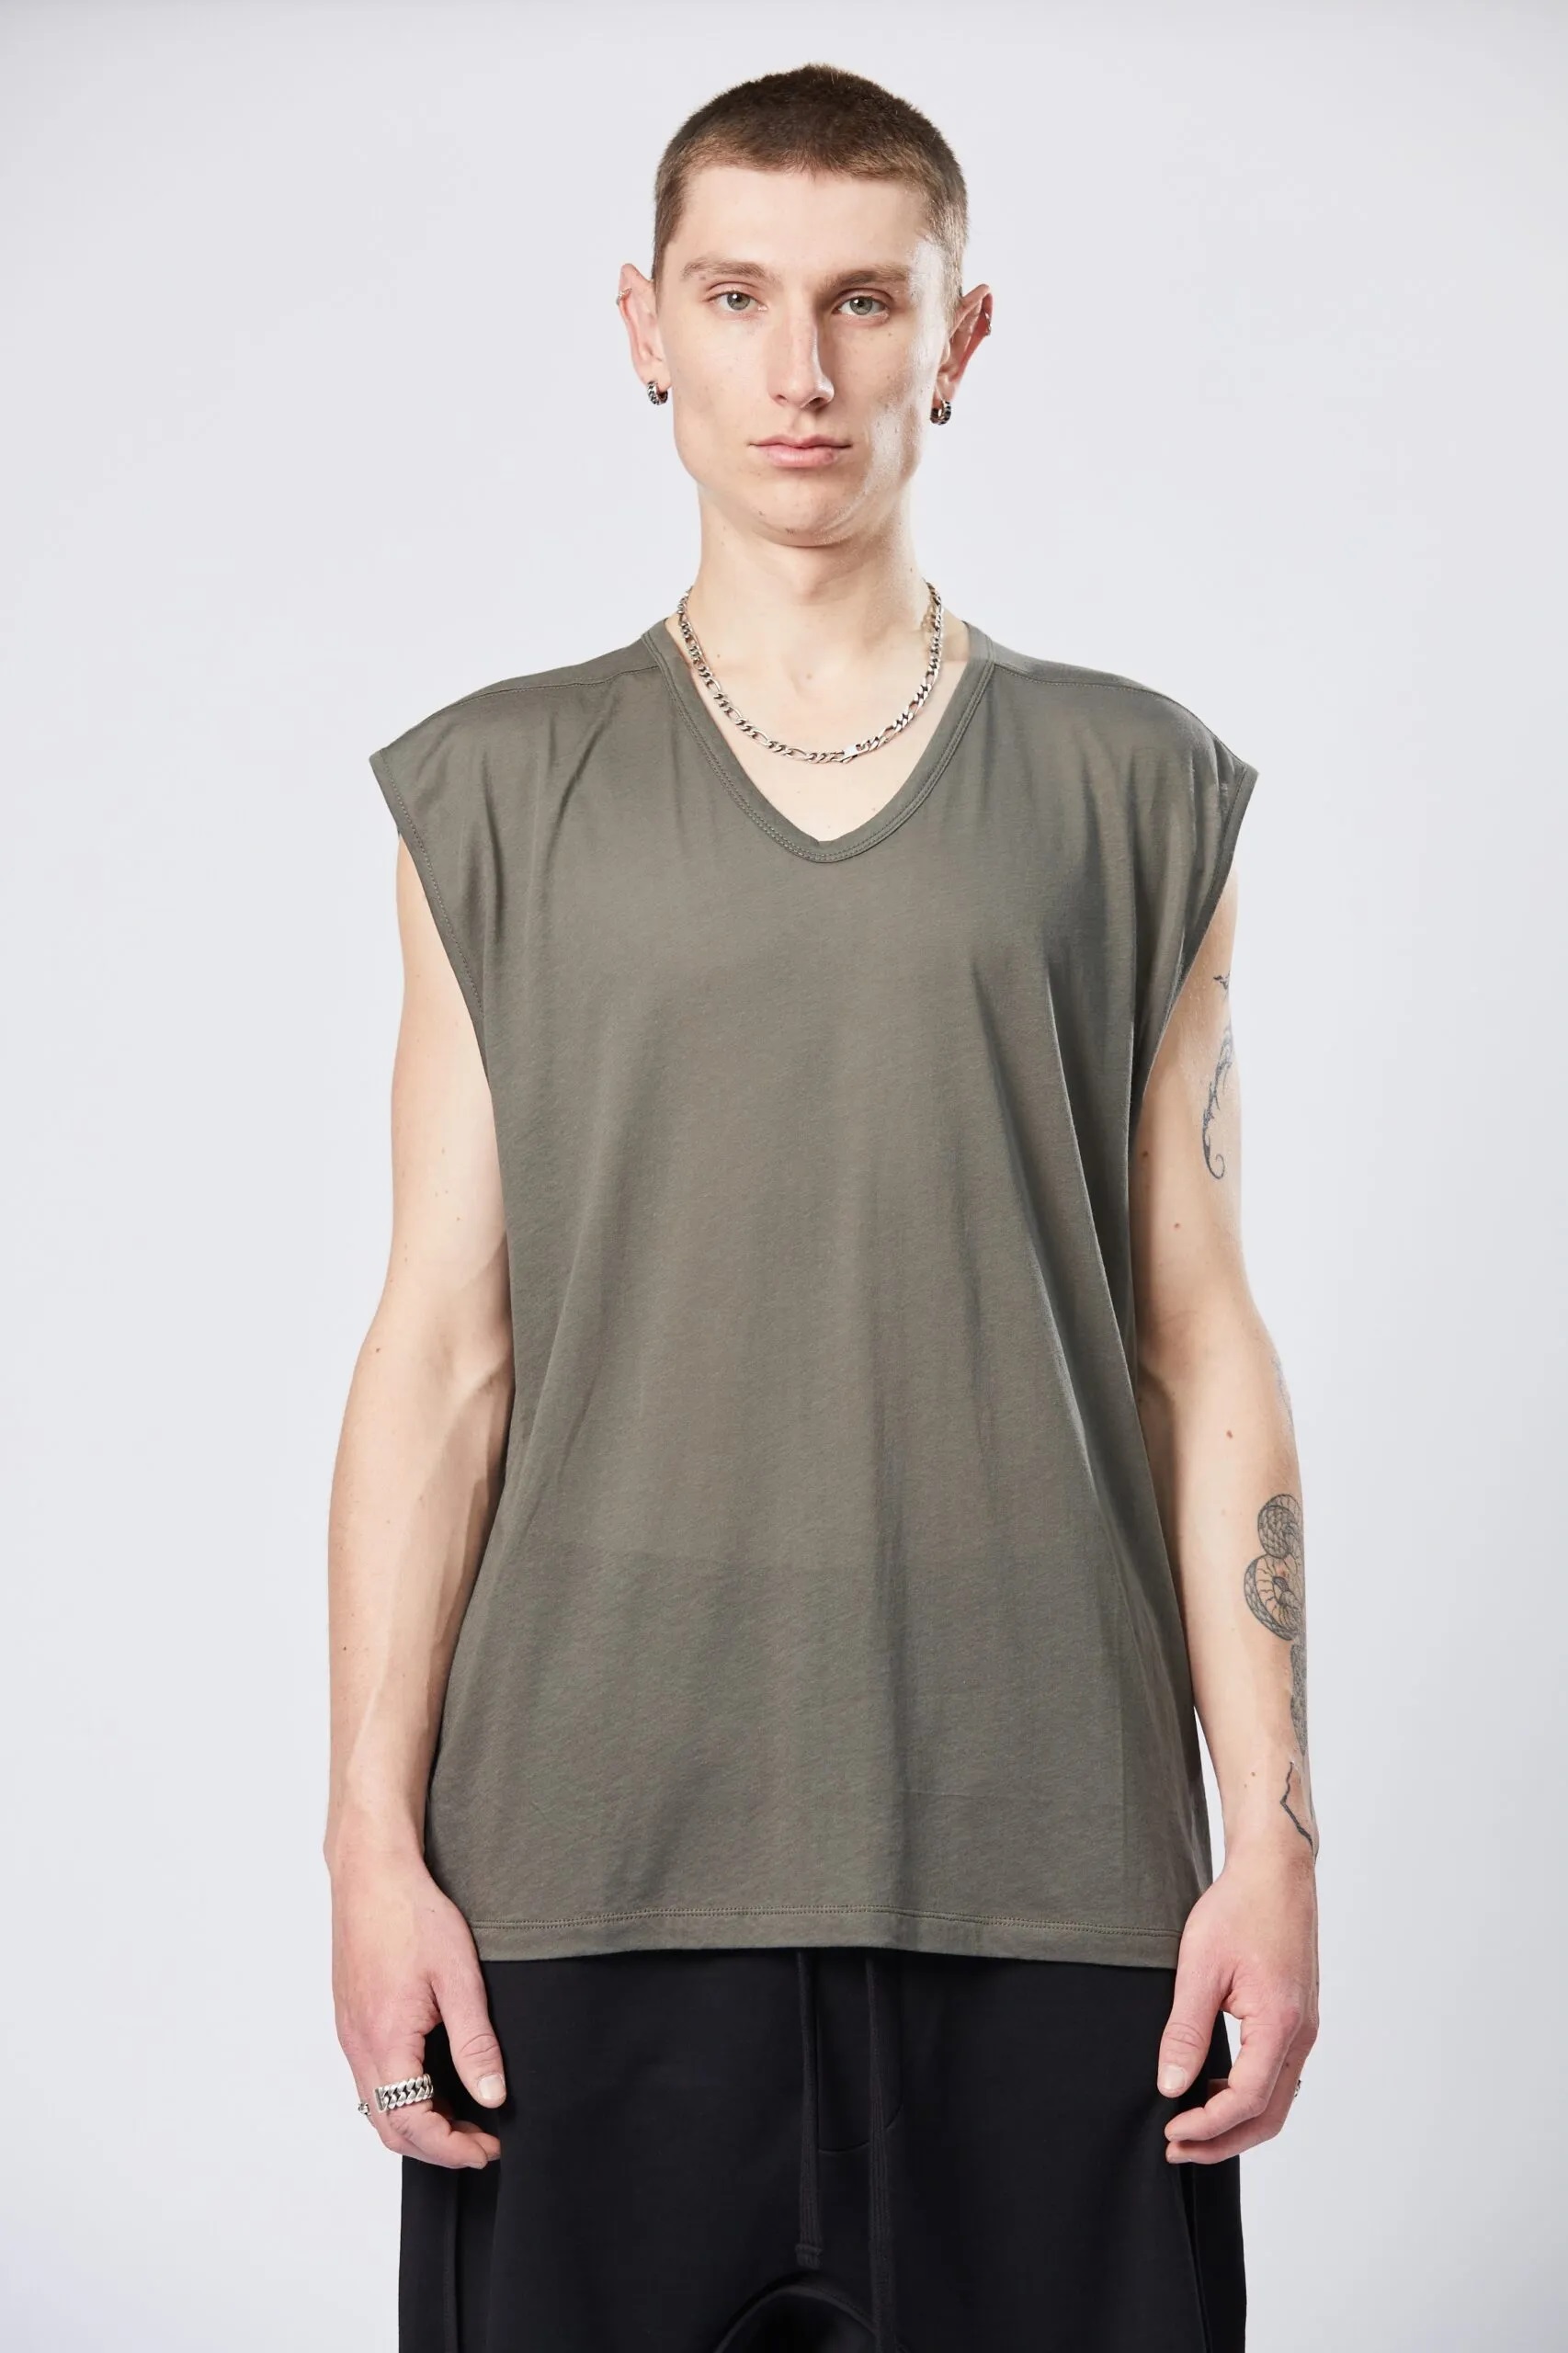 THOM KROM Muscle Shirt in Ivy Green S